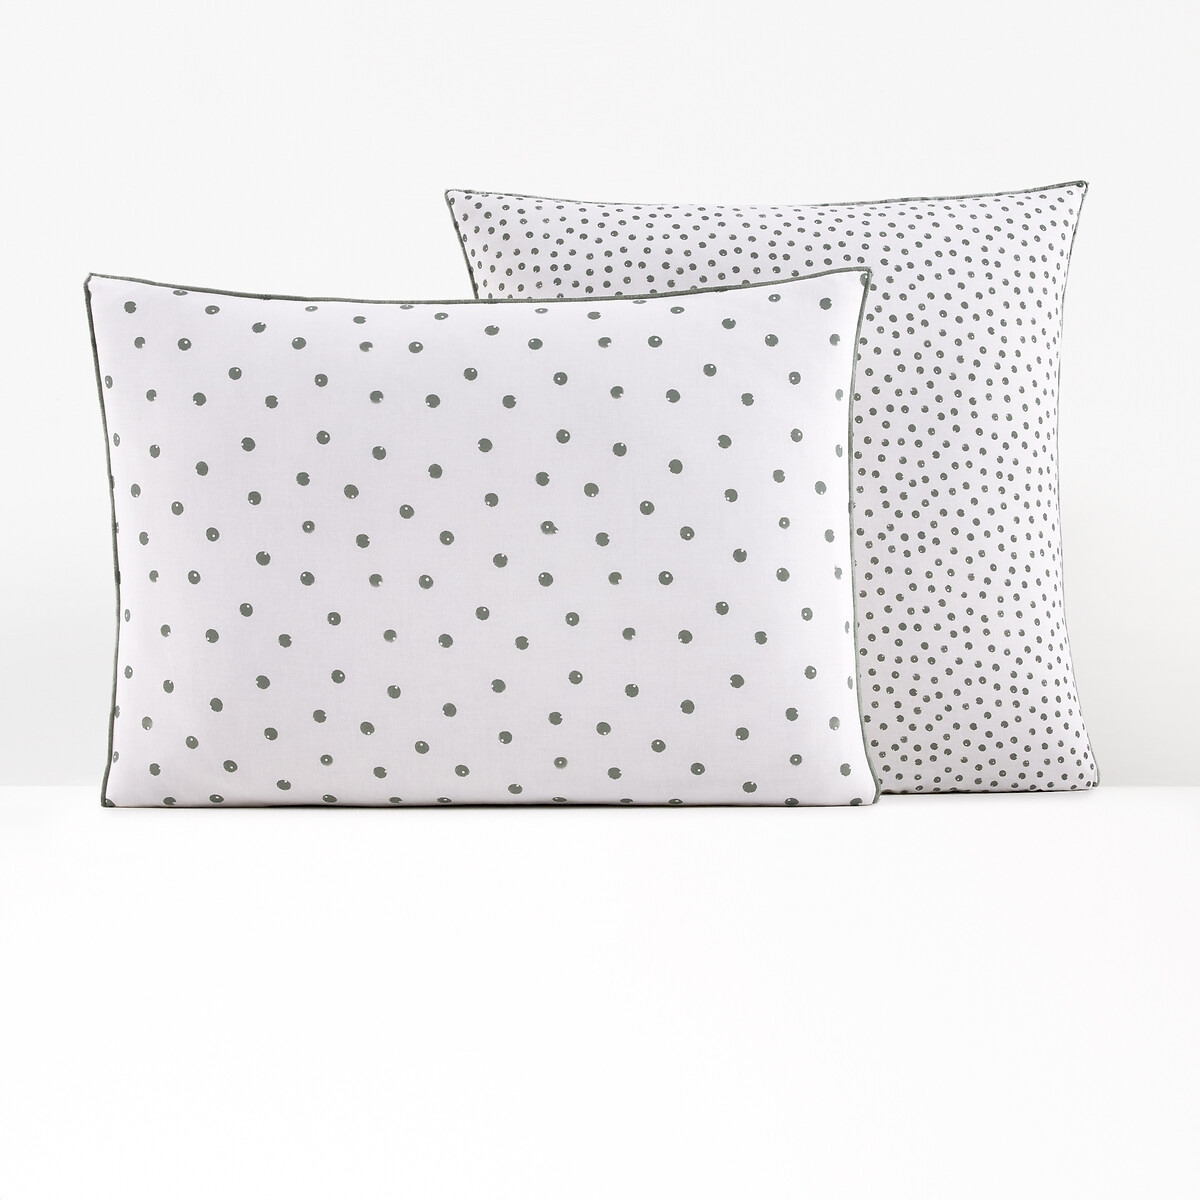 Lison Spotted 100% Washed Cotton Pillowcase - image 1